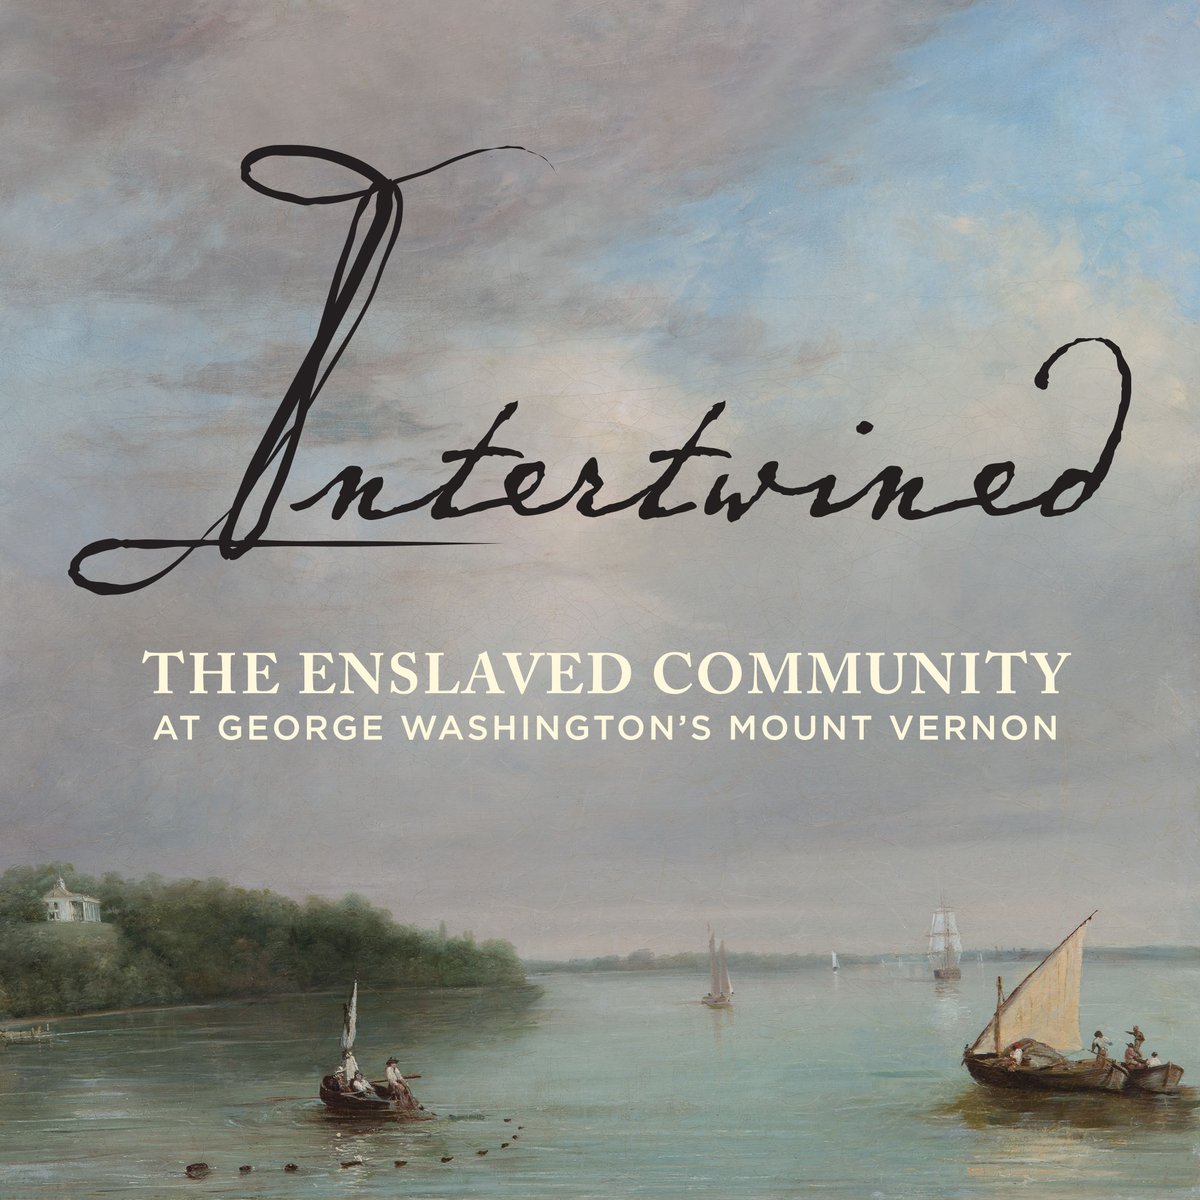 NOW PLAYING: Intertwined Episode 1: 'Passages.' Told through the life of Sambo Anderson. Featuring Brenda Stevenson (@StJohnsOx), Lorena Walsh (@colonialwmsburg), John C. Coombs (@HSC1776), Lynn Price Robbins (@Lprice3) & Jessie Macleod (@MountVernon). bit.ly/IntertwinedEP1